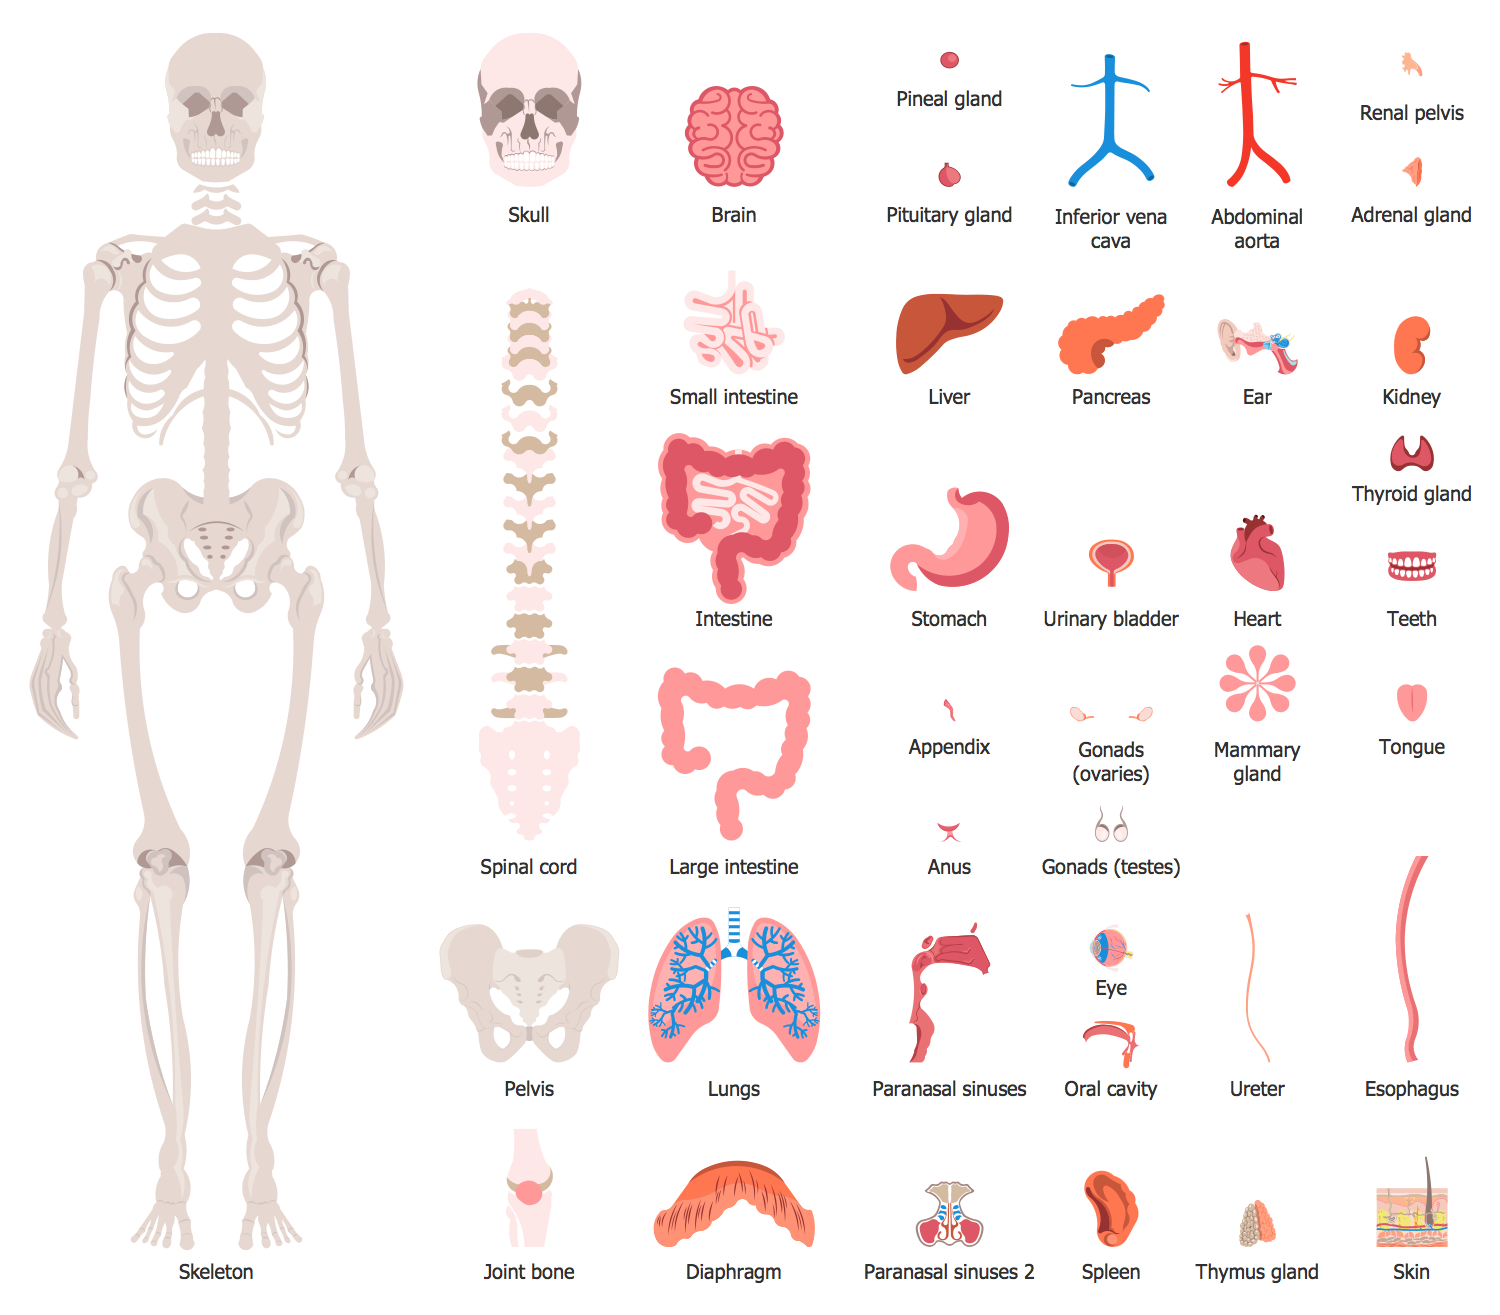 New Human Anatomy Solution for ConceptDraw PRO Added to Solution Park Image